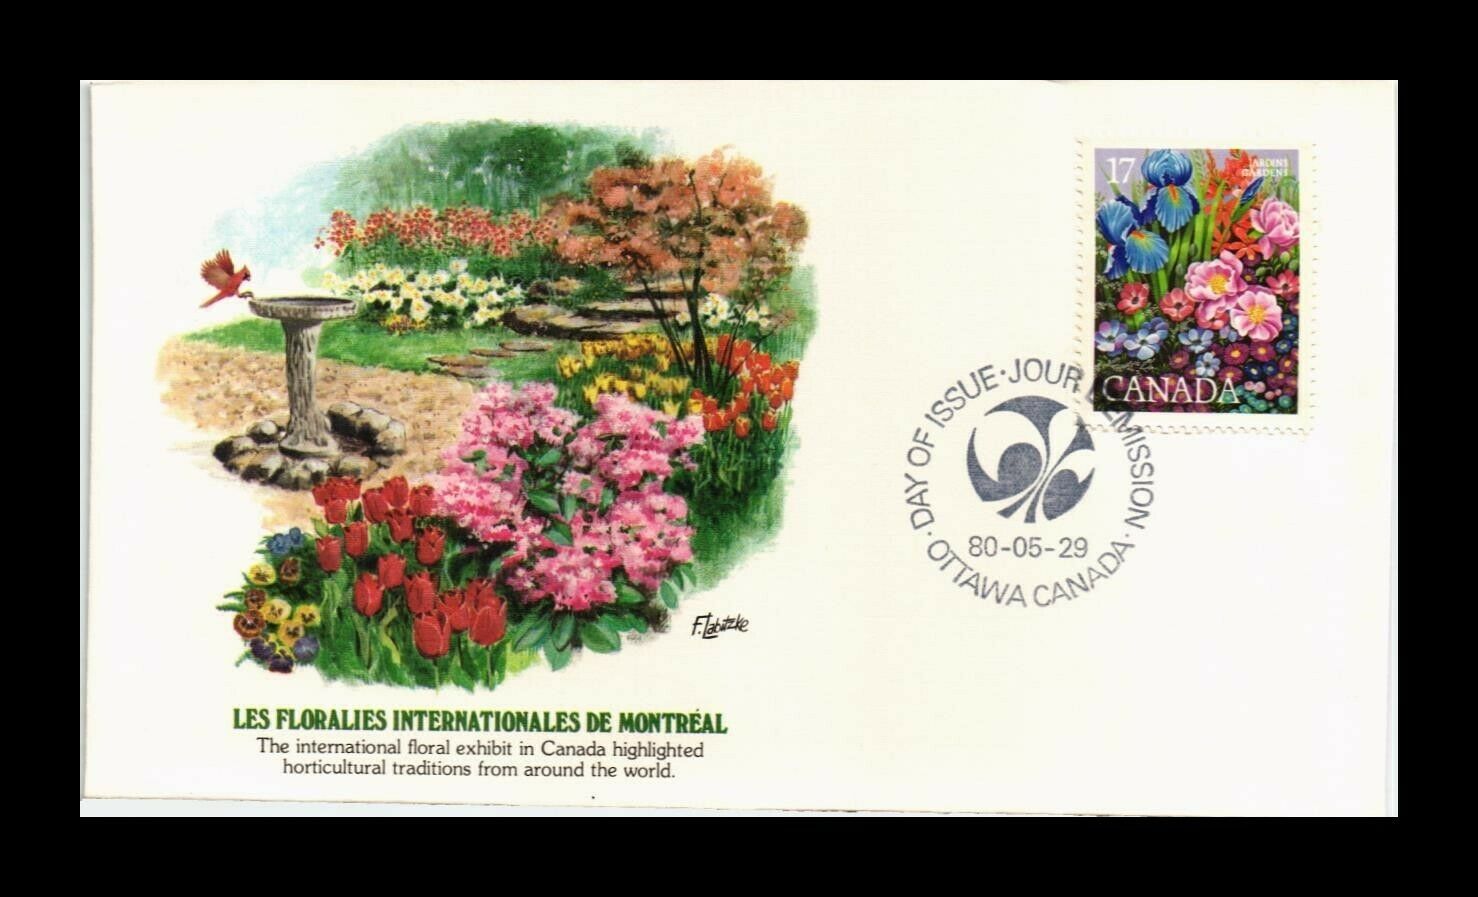 Dr Jim Stamps International Florwer Show Monteal Canada Fdc Cover